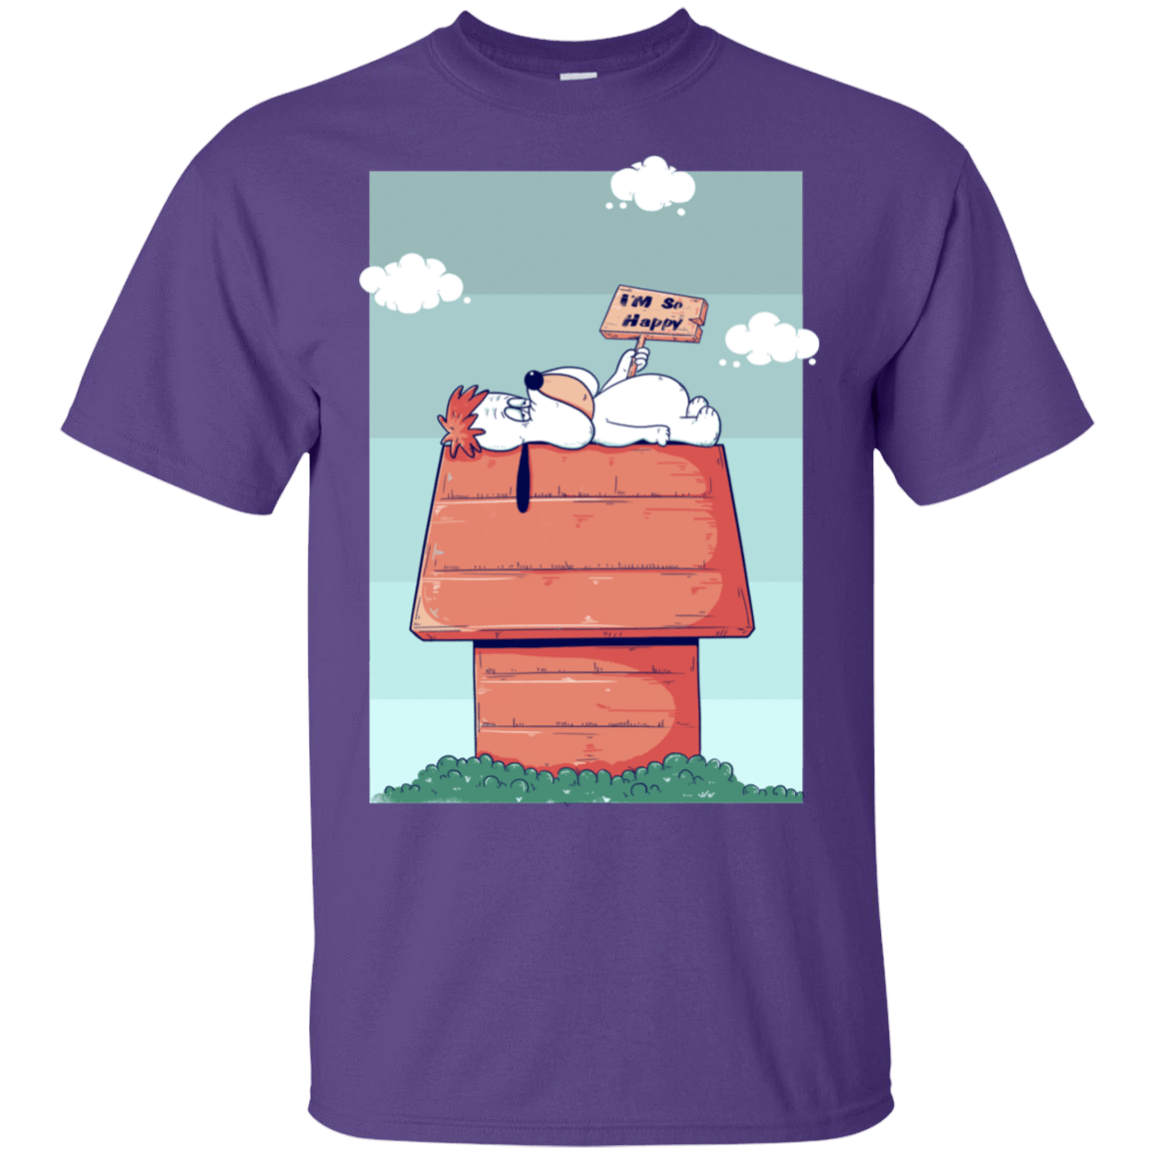 T-Shirts Purple / S Droopy T-Shirt